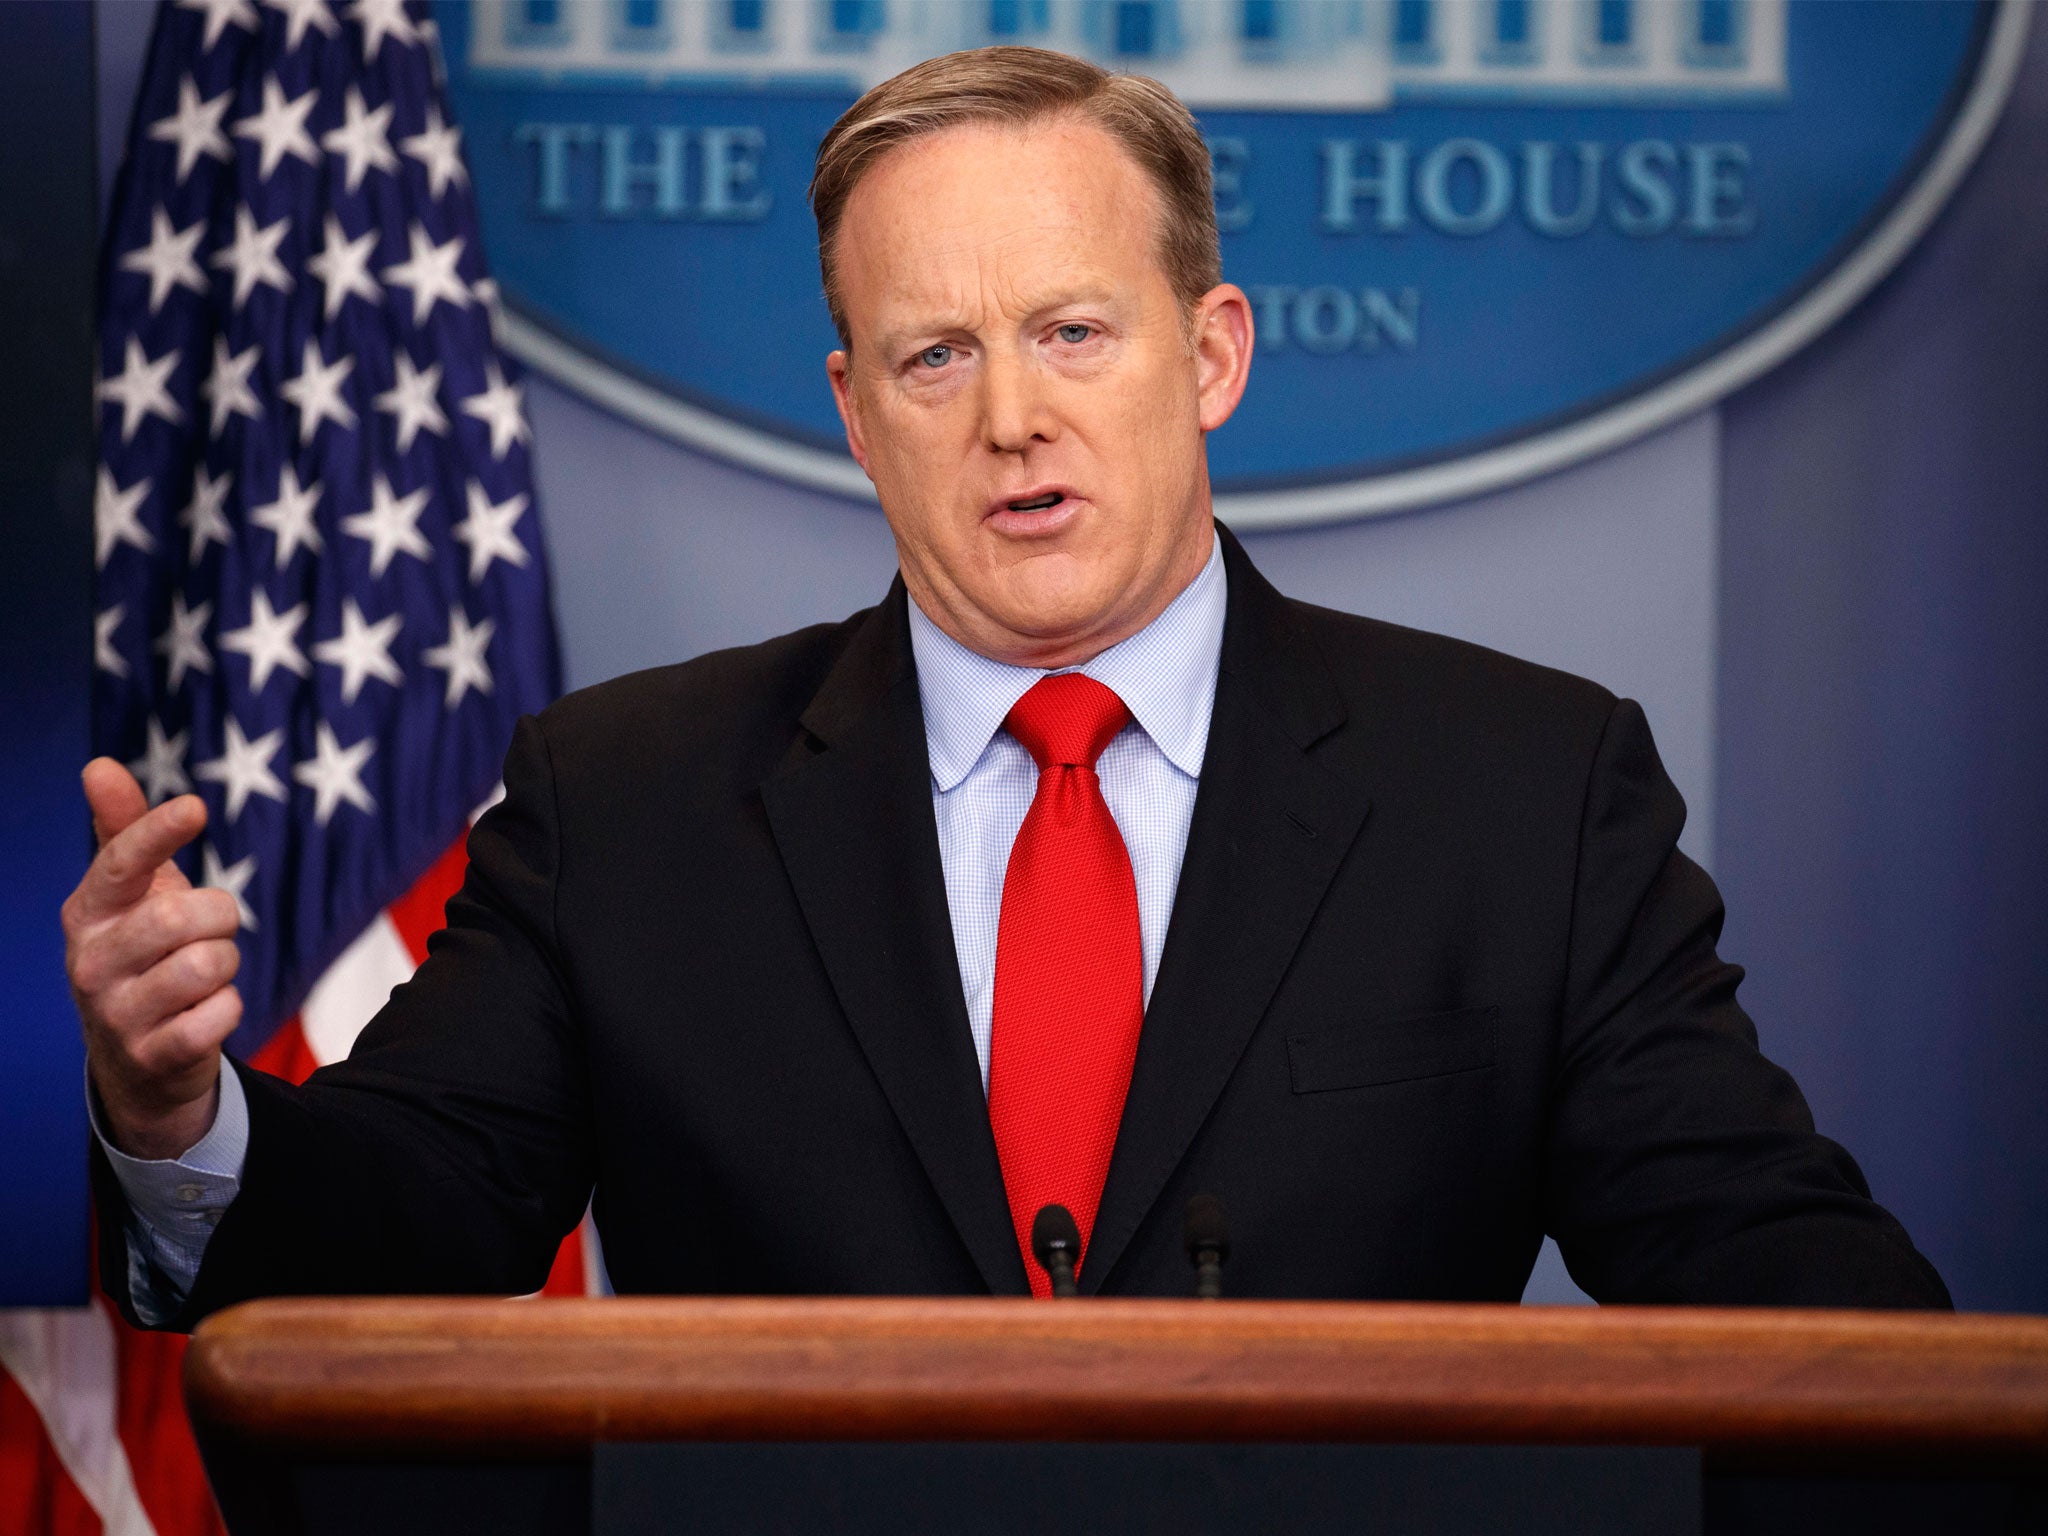 White House press secretary Sean Spicer speaks during the daily press briefing at the White House in Washington on 3 February